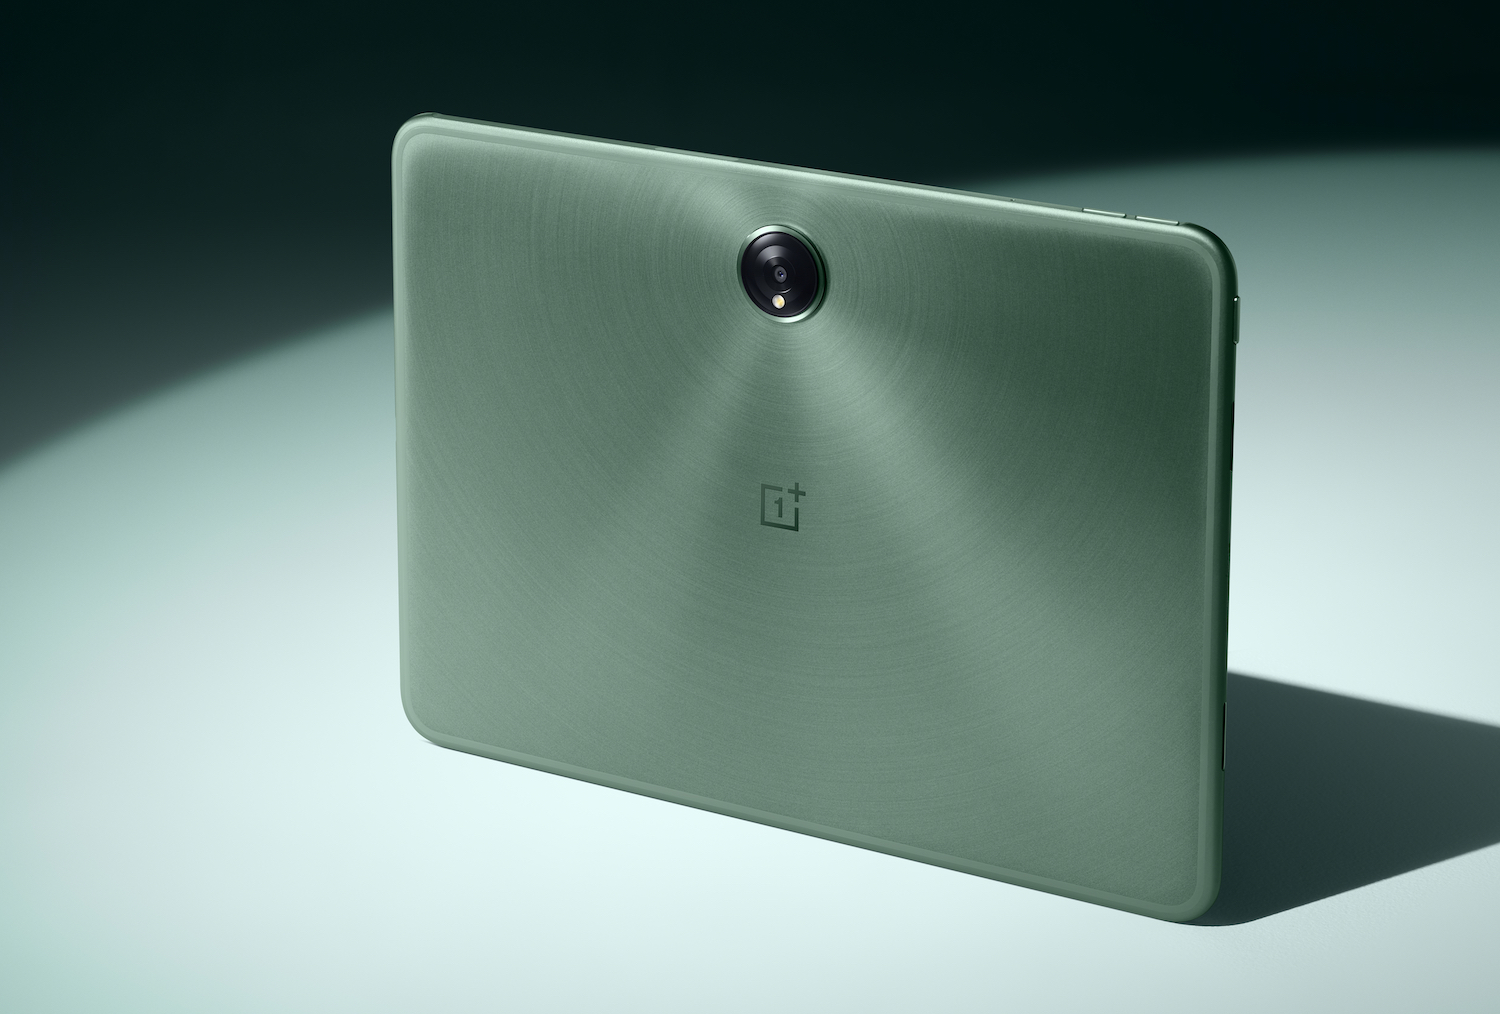 The OnePlus Pad wants you to take Android tablets seriously